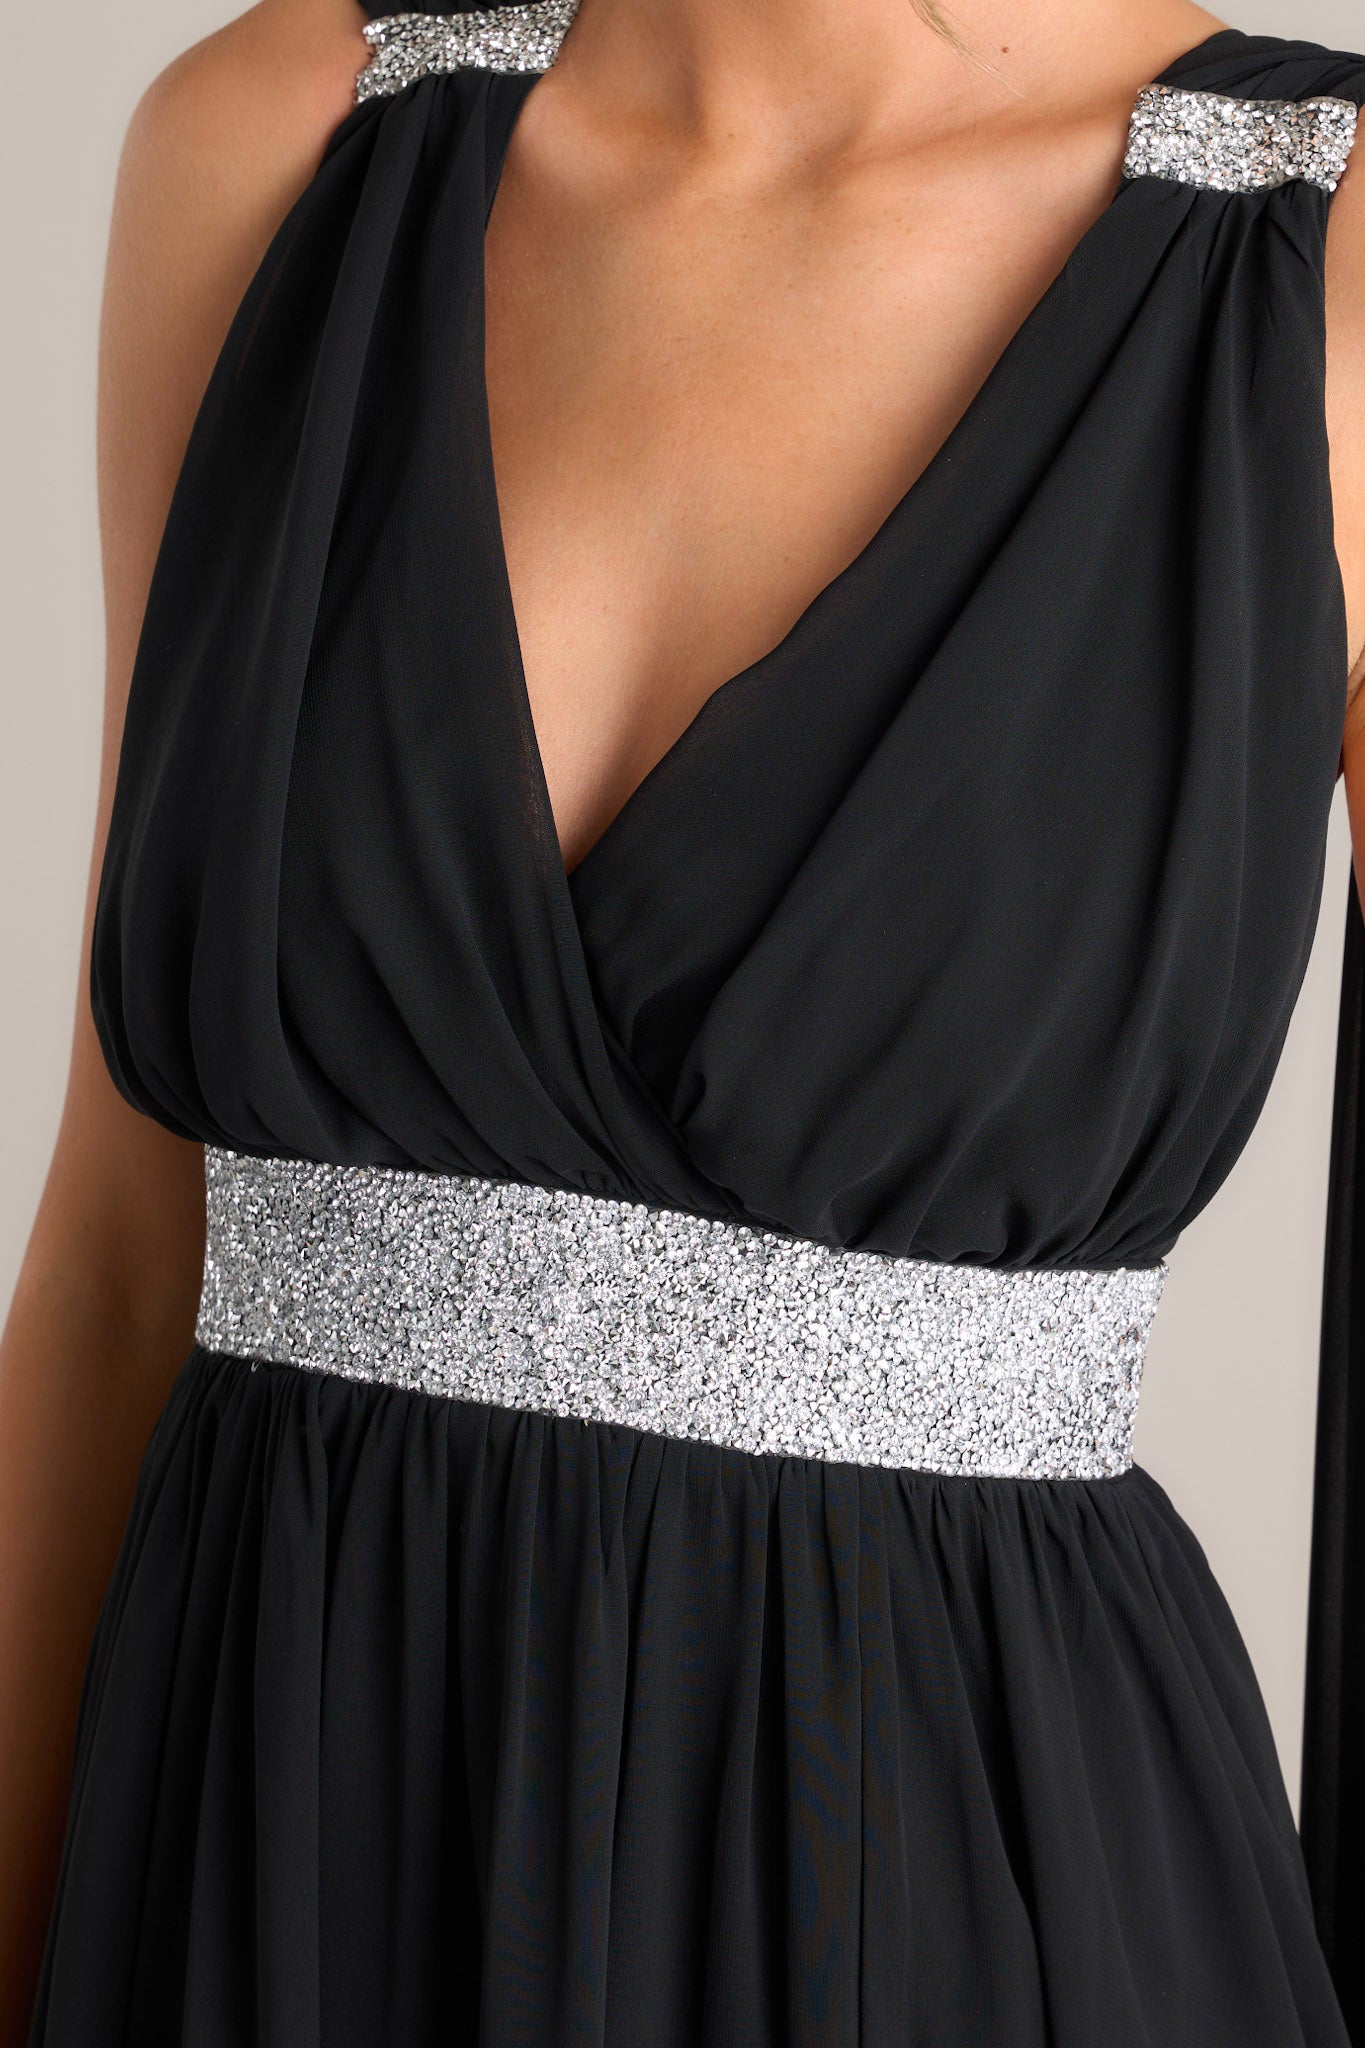 Close up of this dress that features a v-neckline and silver rhinestone detailing around collarbone area and waistline.